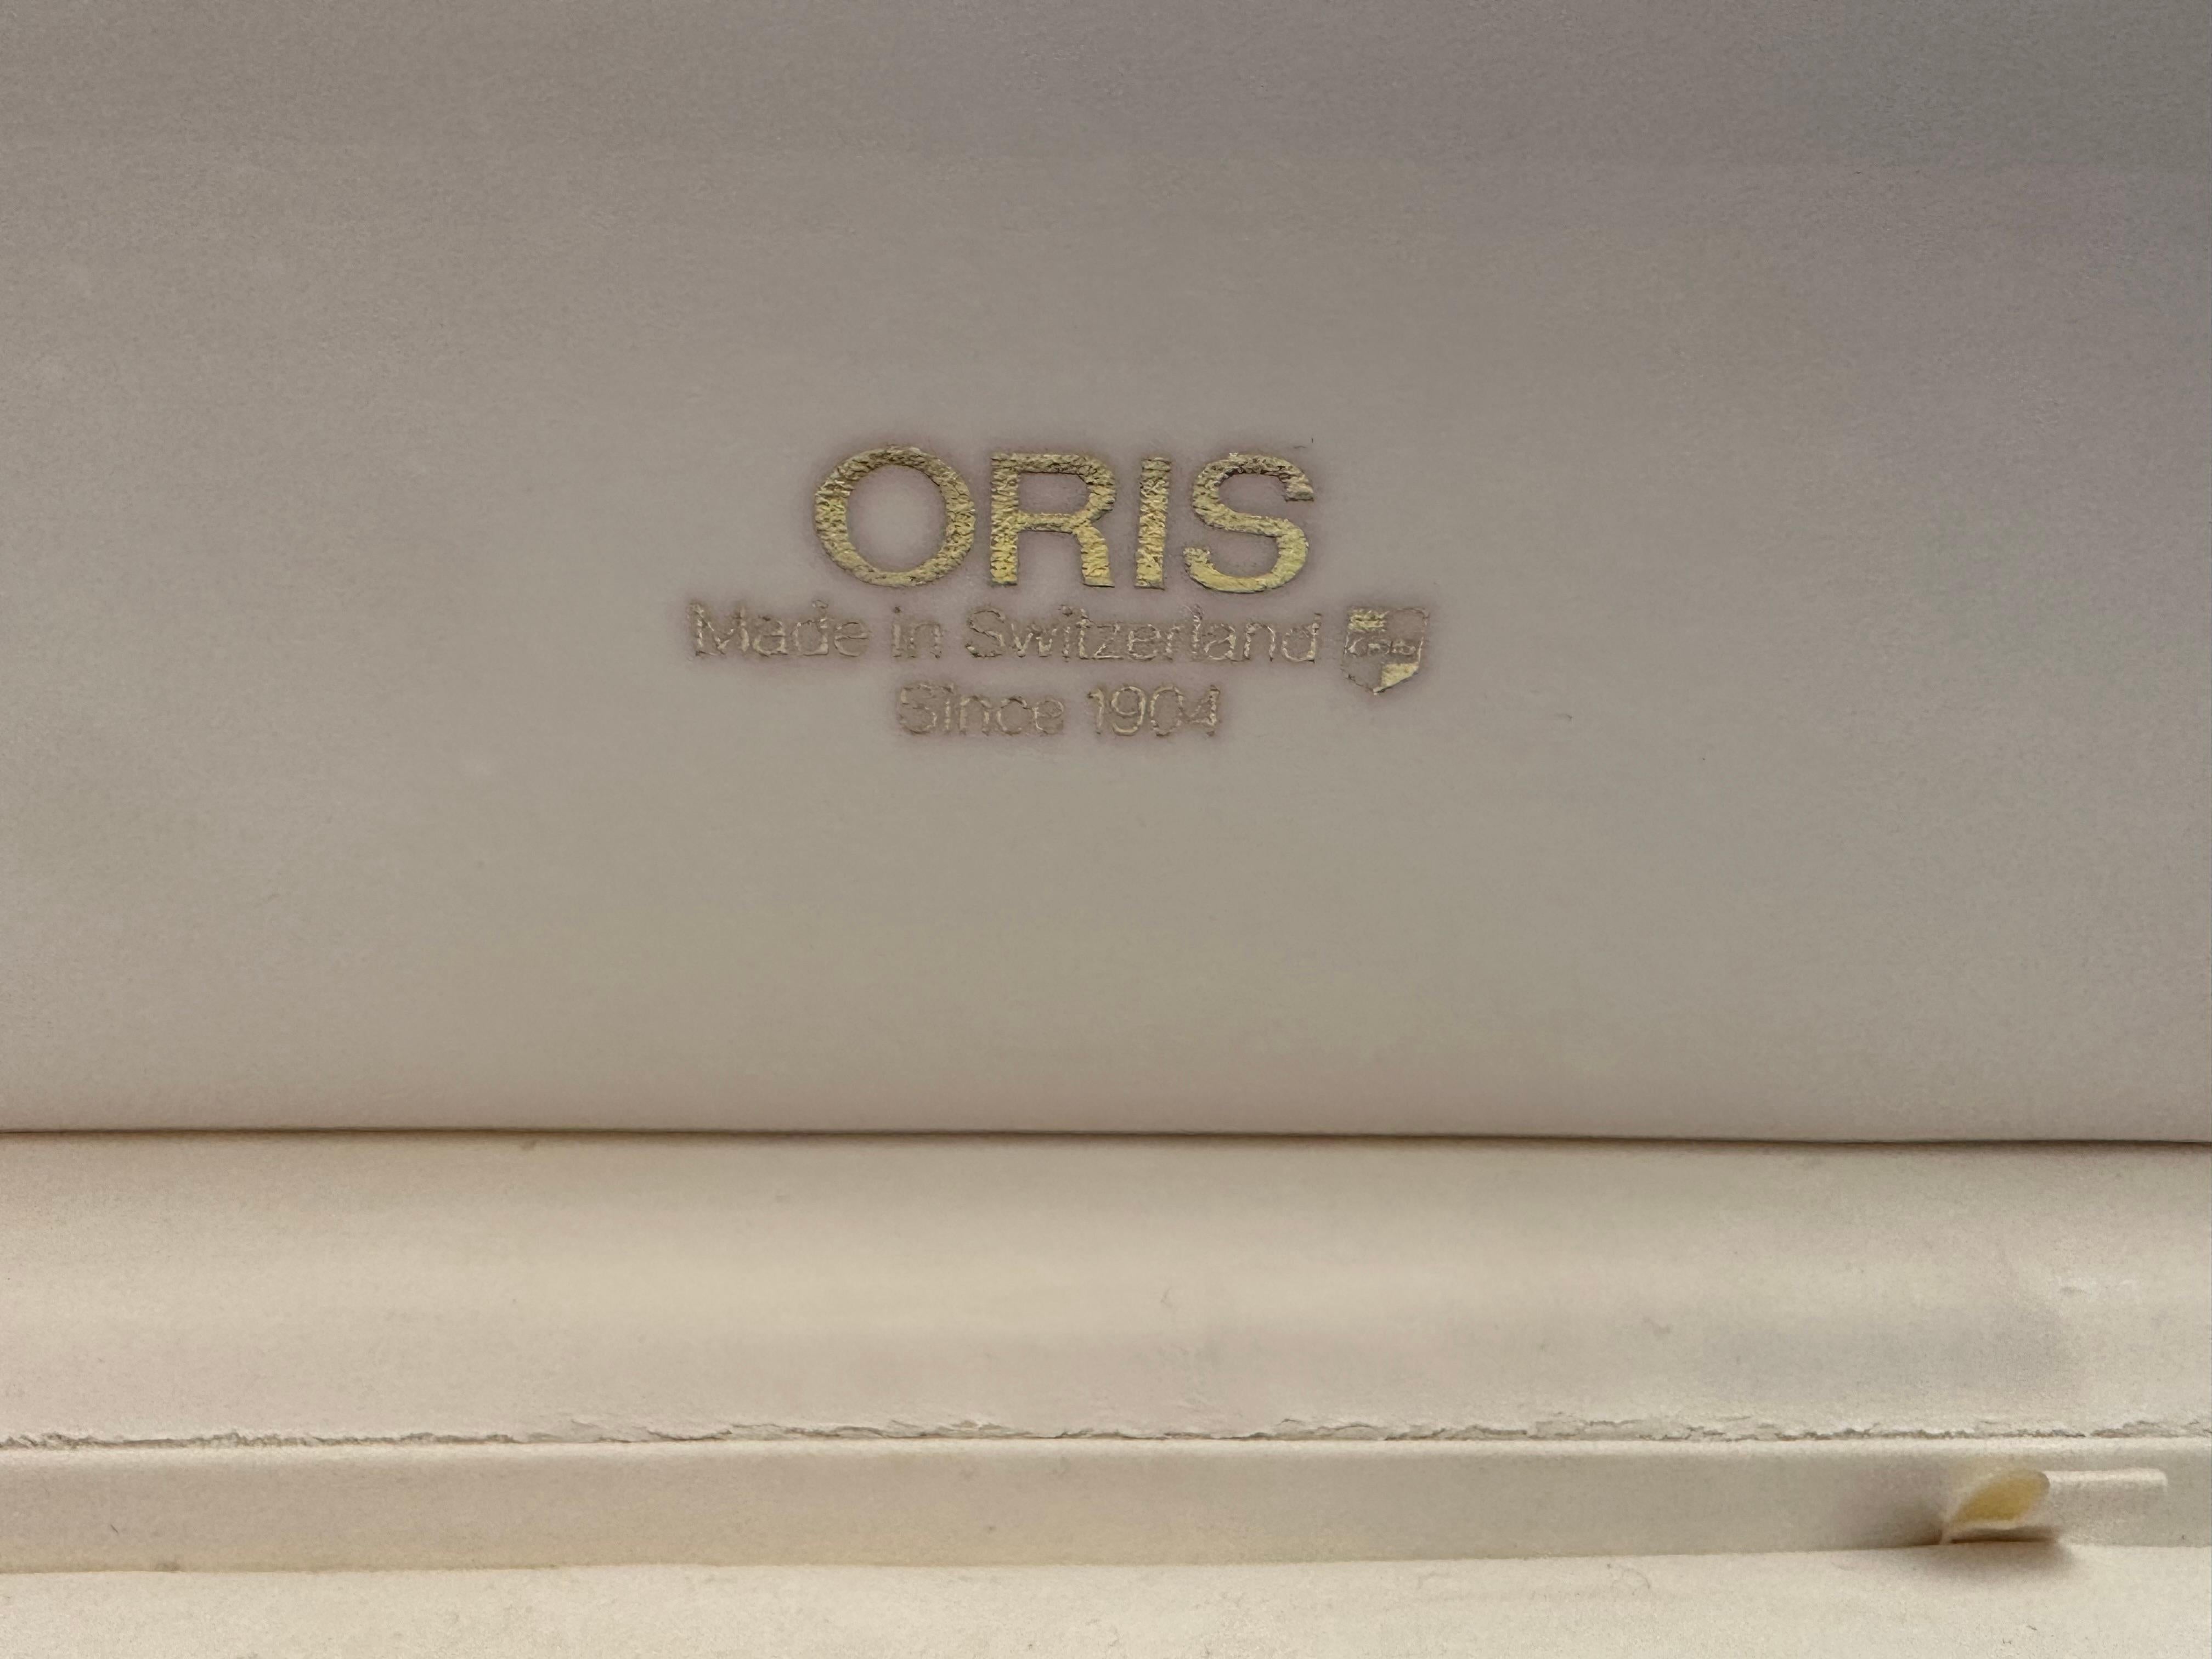 Oris Reveil Limited Edition Mechanical Alarm 18kt Gold, New with Box & Papers en vente 13